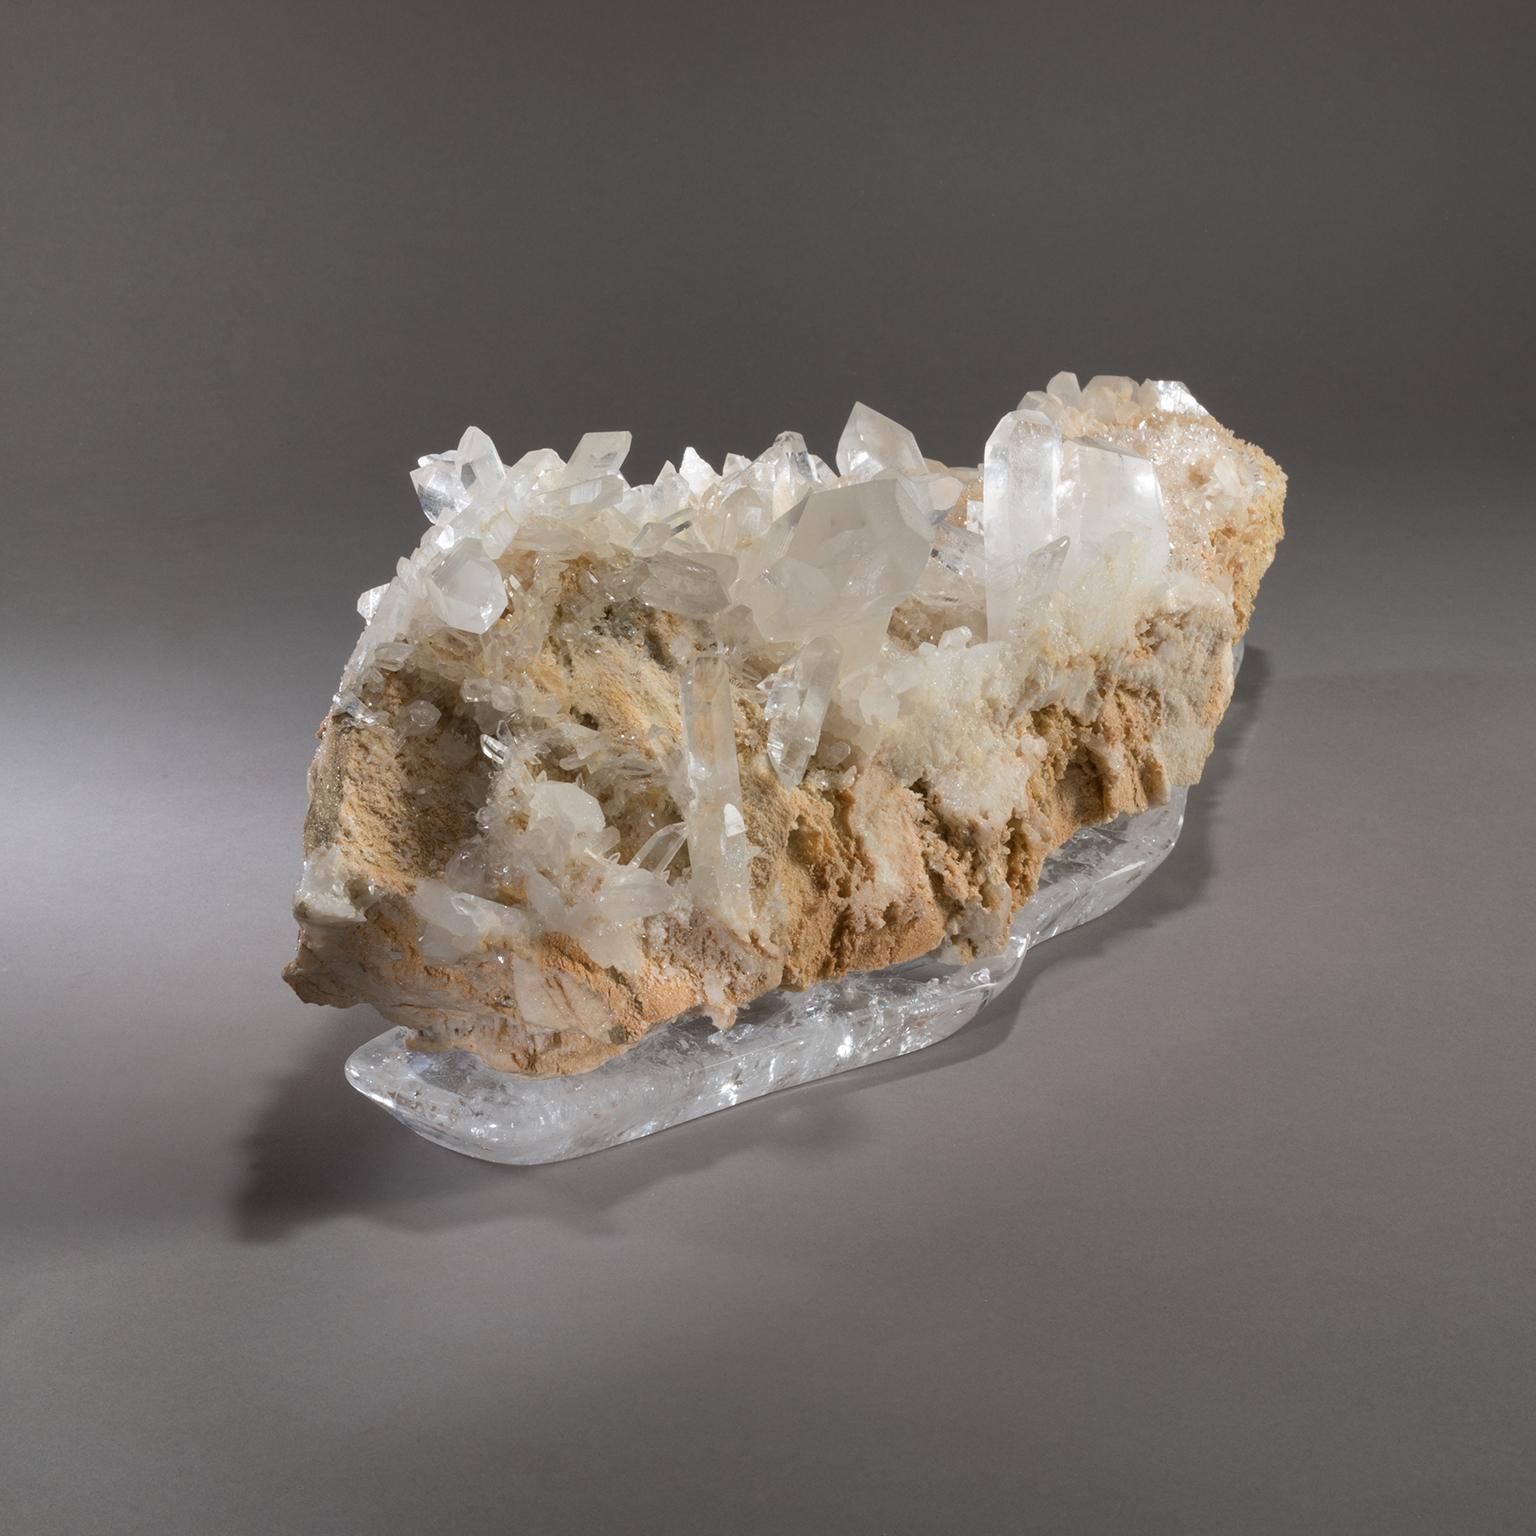 HIMALAYAN QUARTZ ON CRYSTAL BASE

The Himalayas stretch for 1,500 miles, a long, sweeping arc separating the Indian subcontinent and the rest of Asia. Studio Greytak’s Himalayan Quartz on Crystal Base pays homage to these mystic mountains. Icy